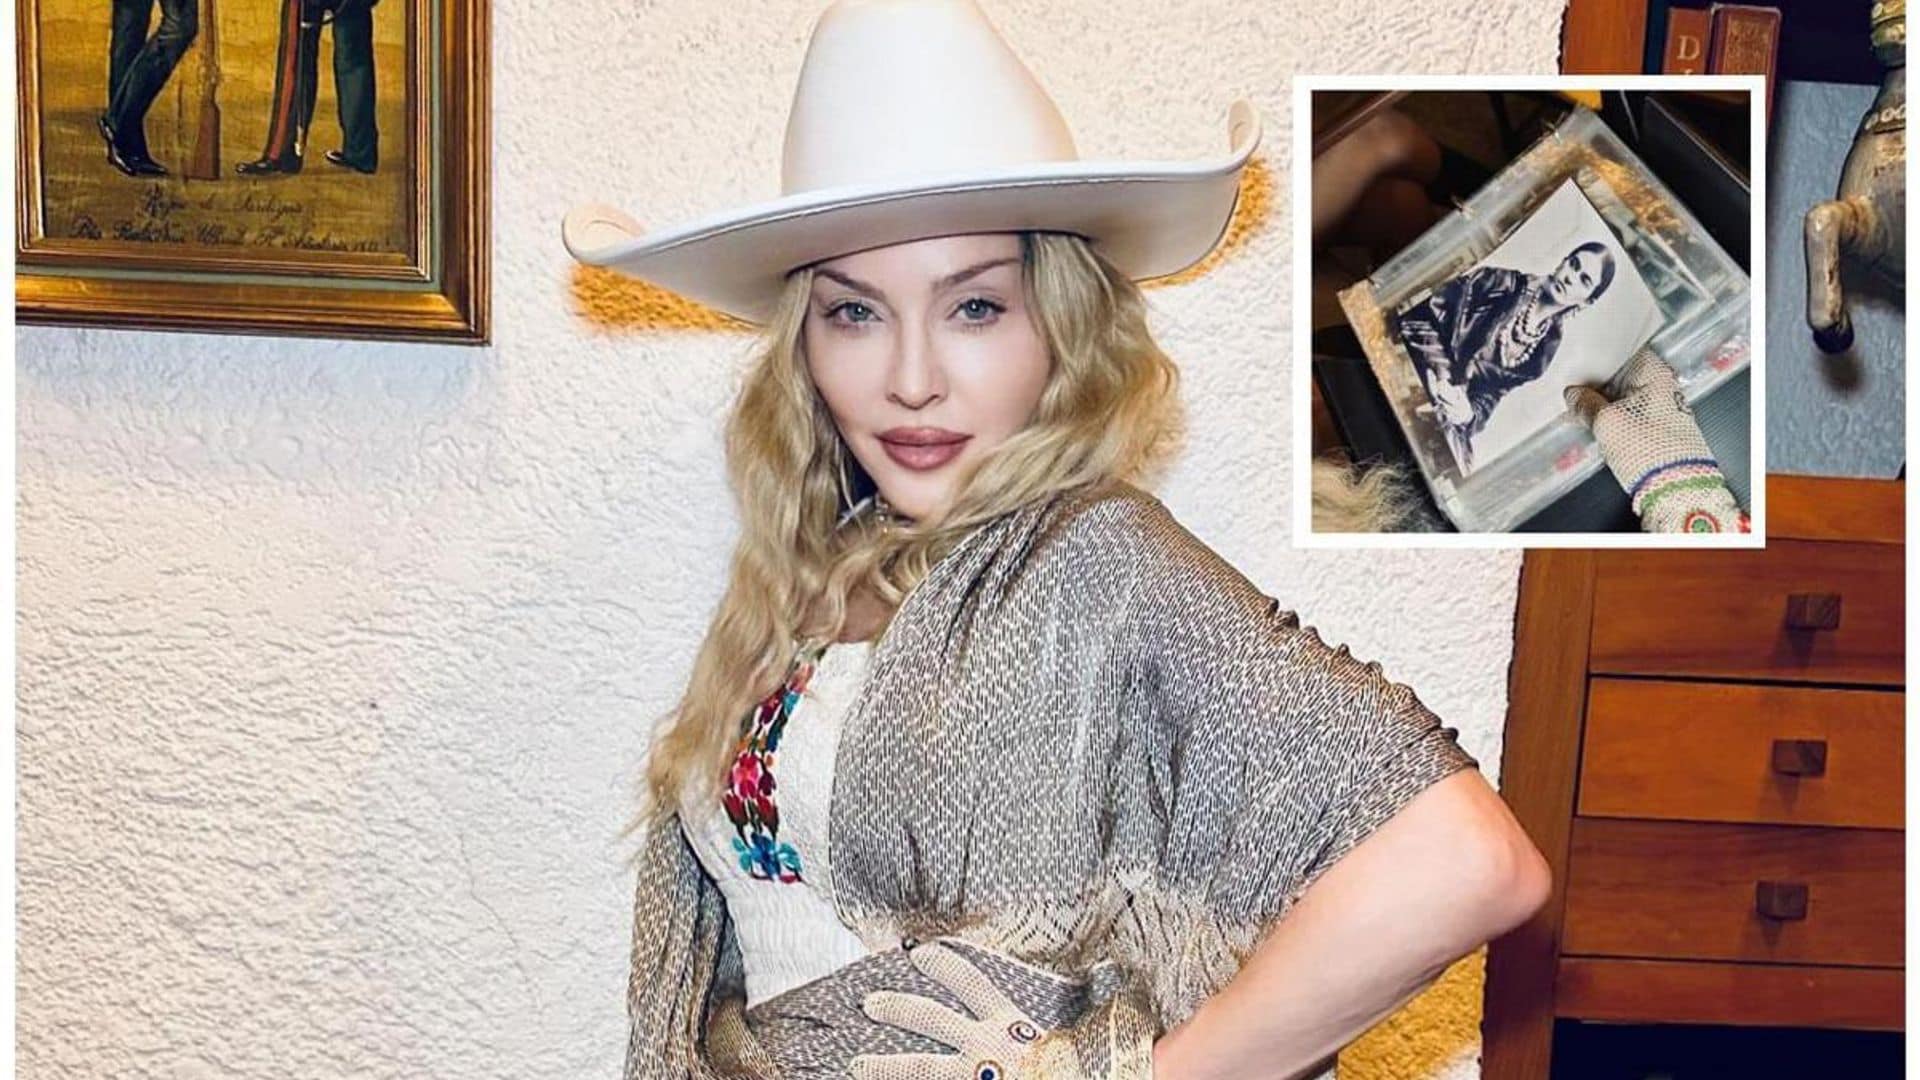 Madonna might be the biggest fan of Frida Kahlo